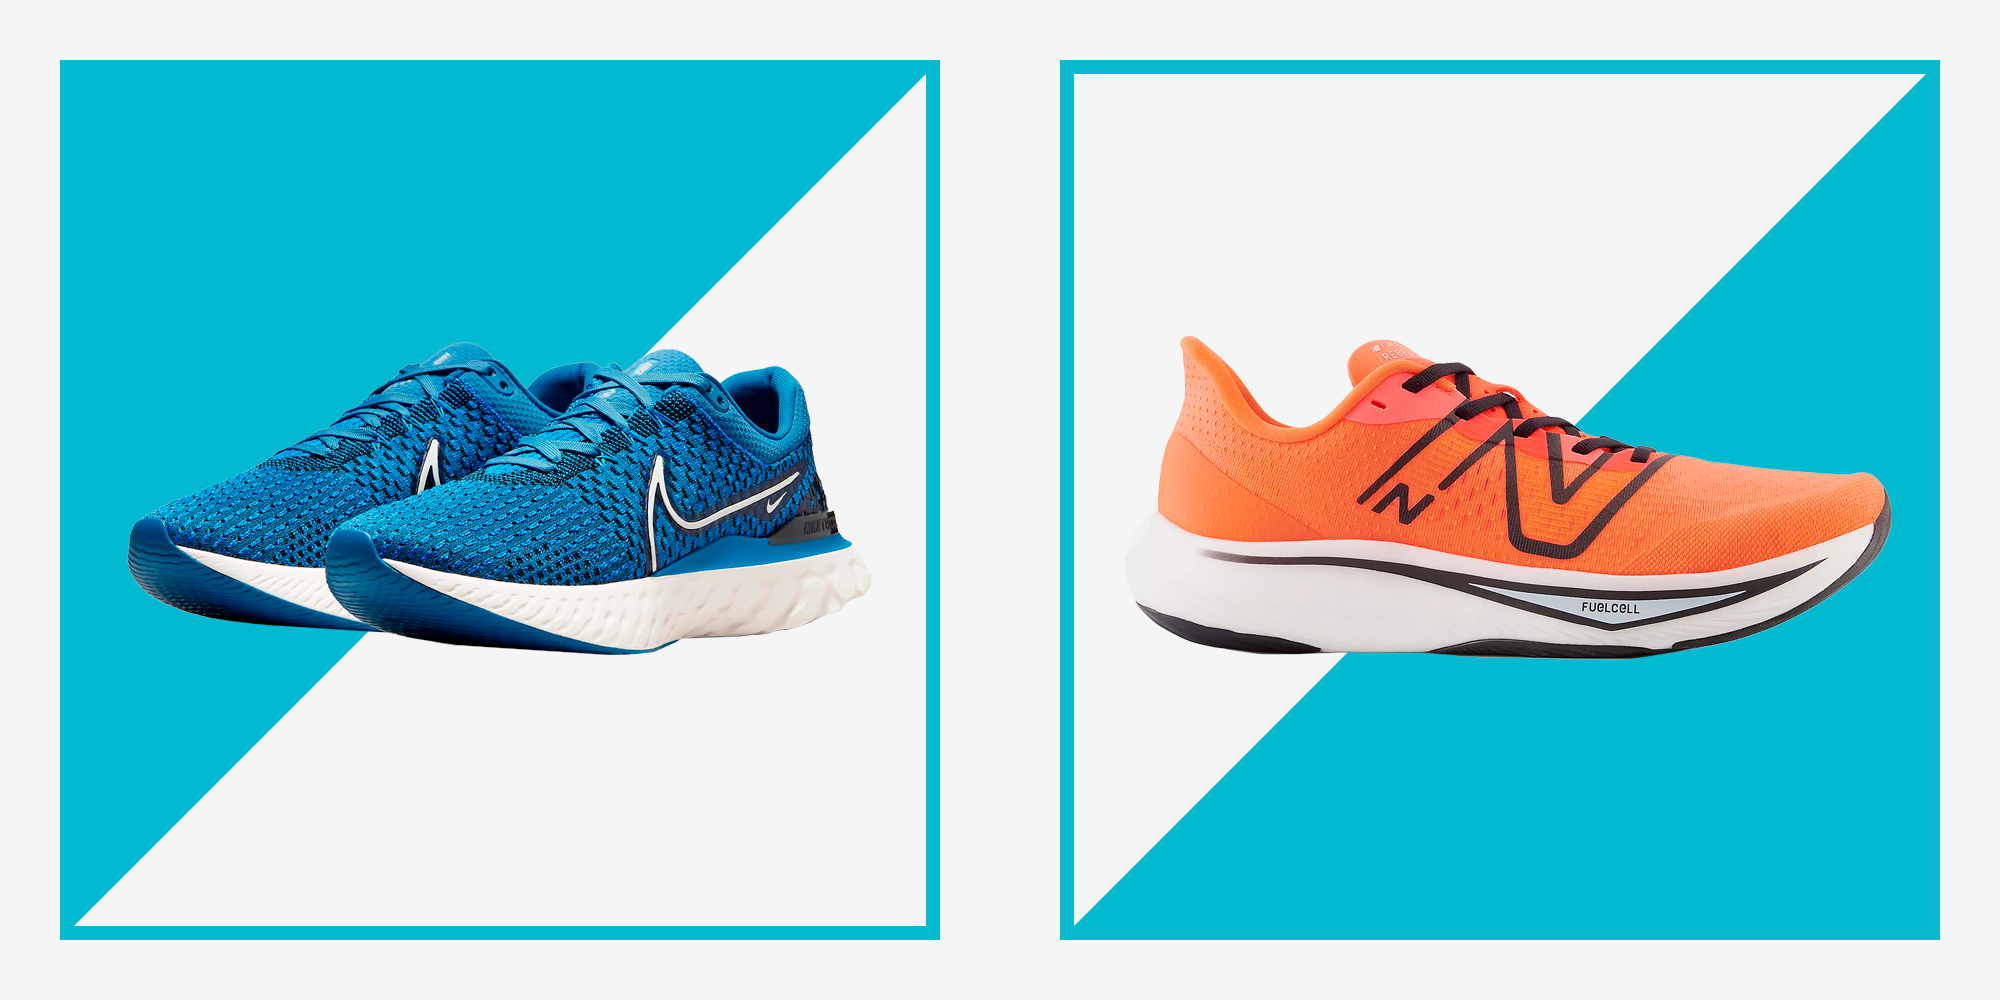 7 Editor-Approved Treadmill Shoes for Every Type of Runner